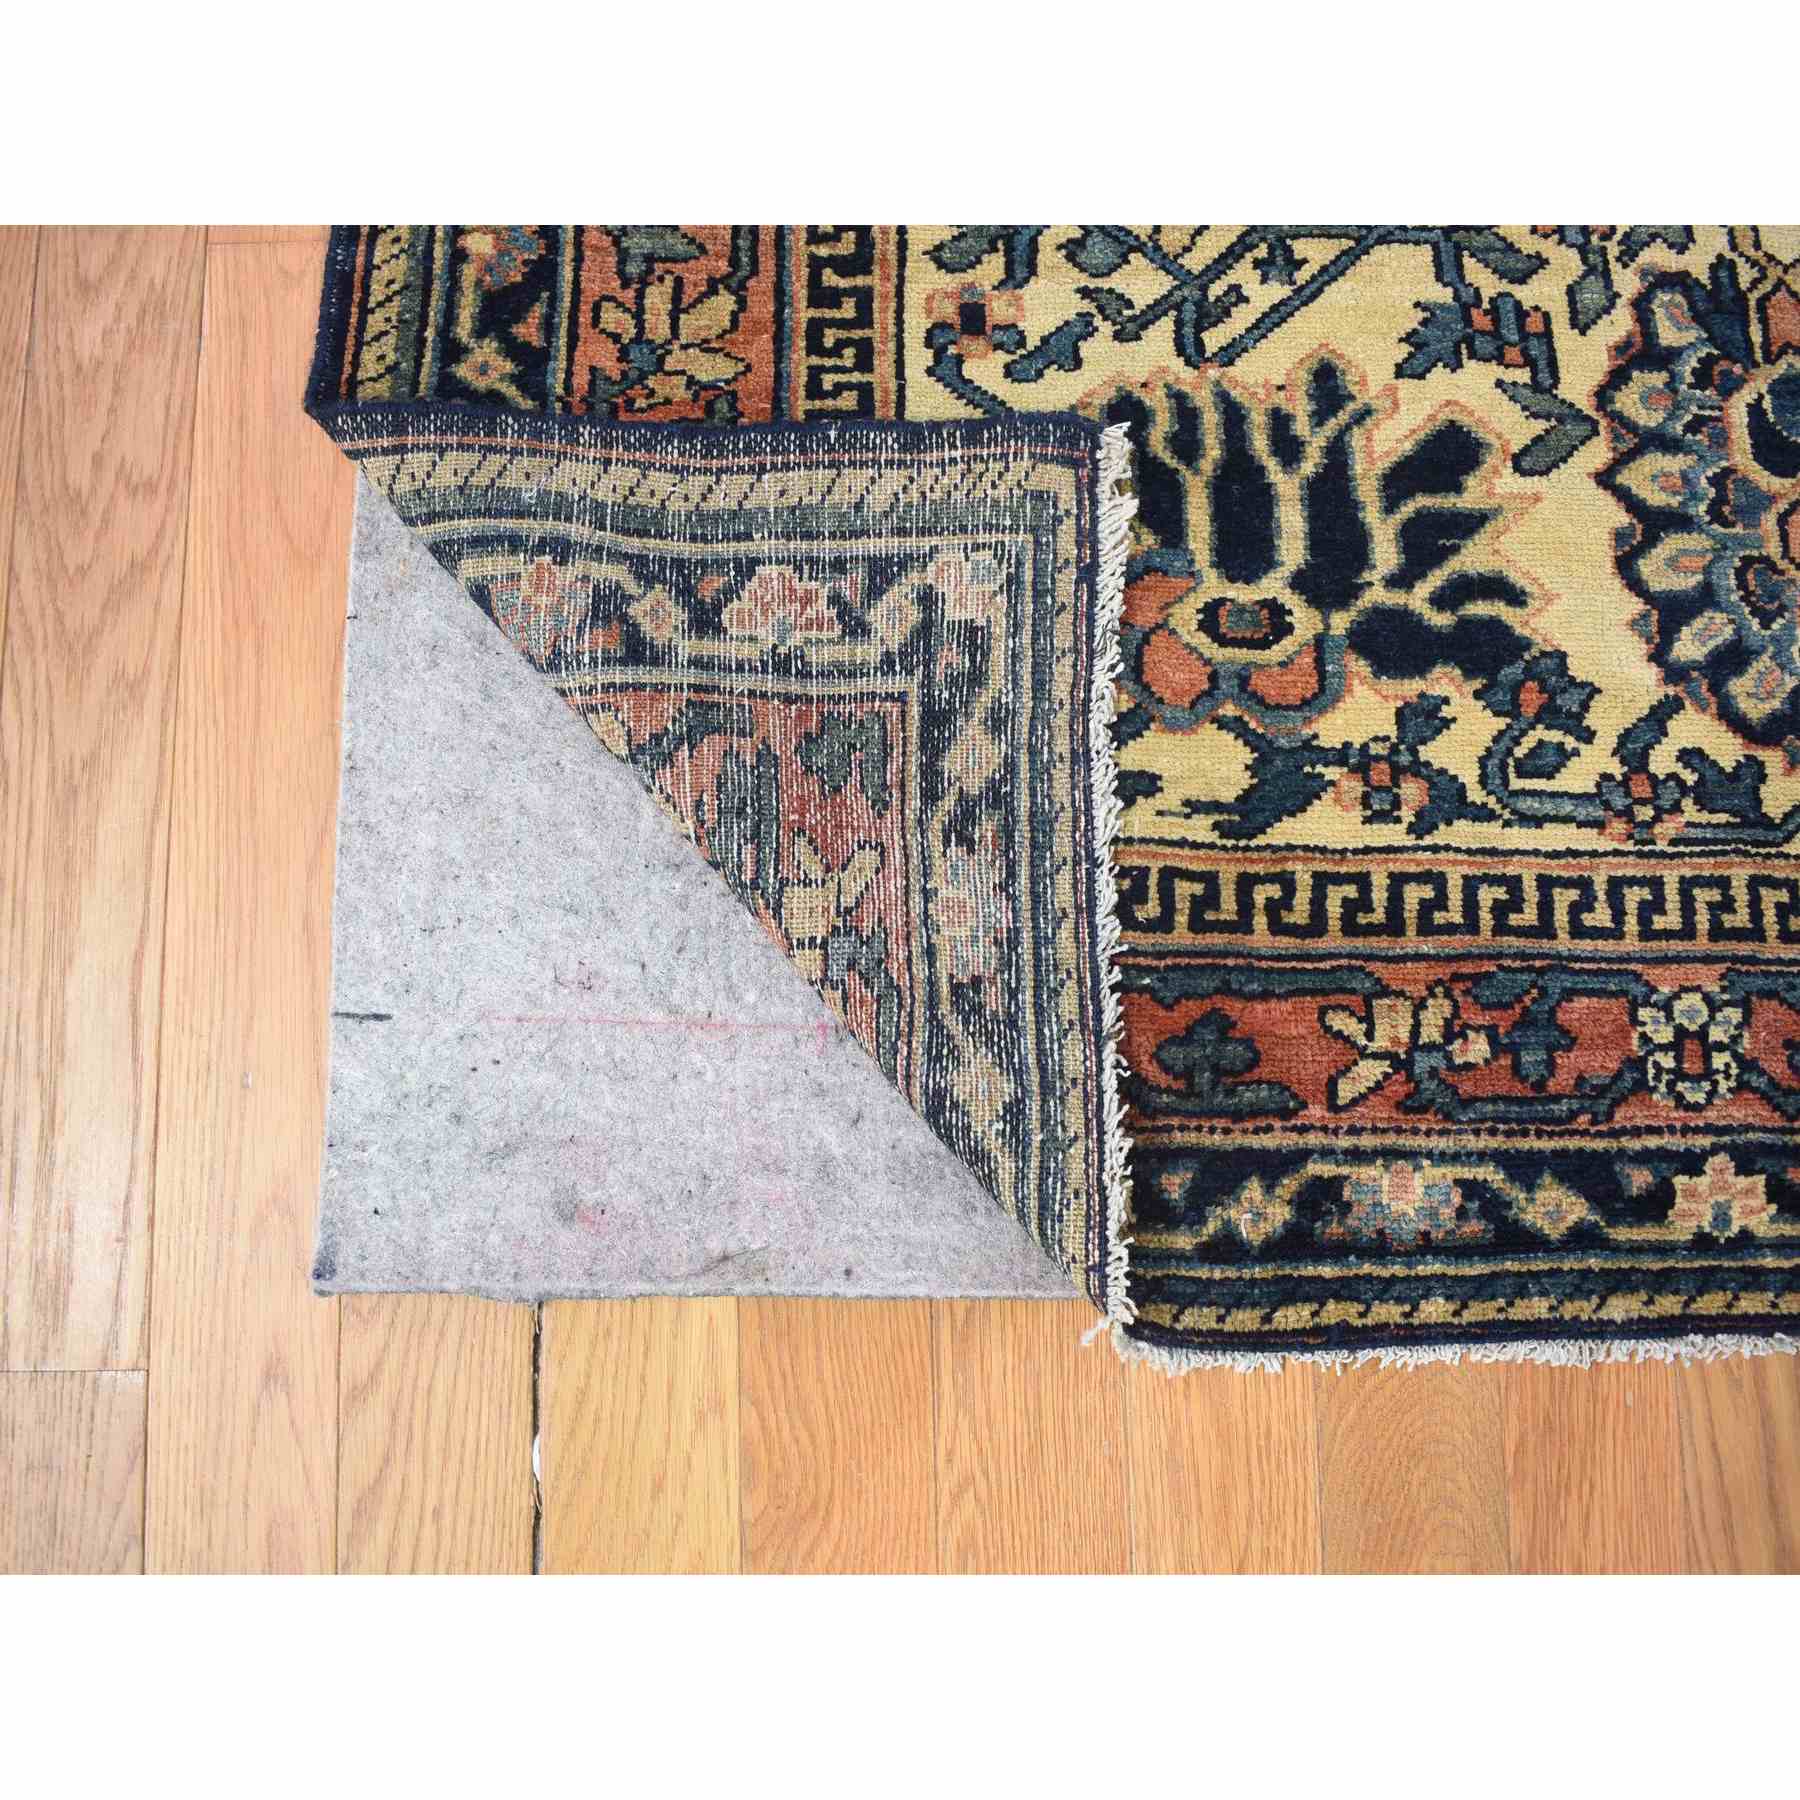 Antique-Hand-Knotted-Rug-400275